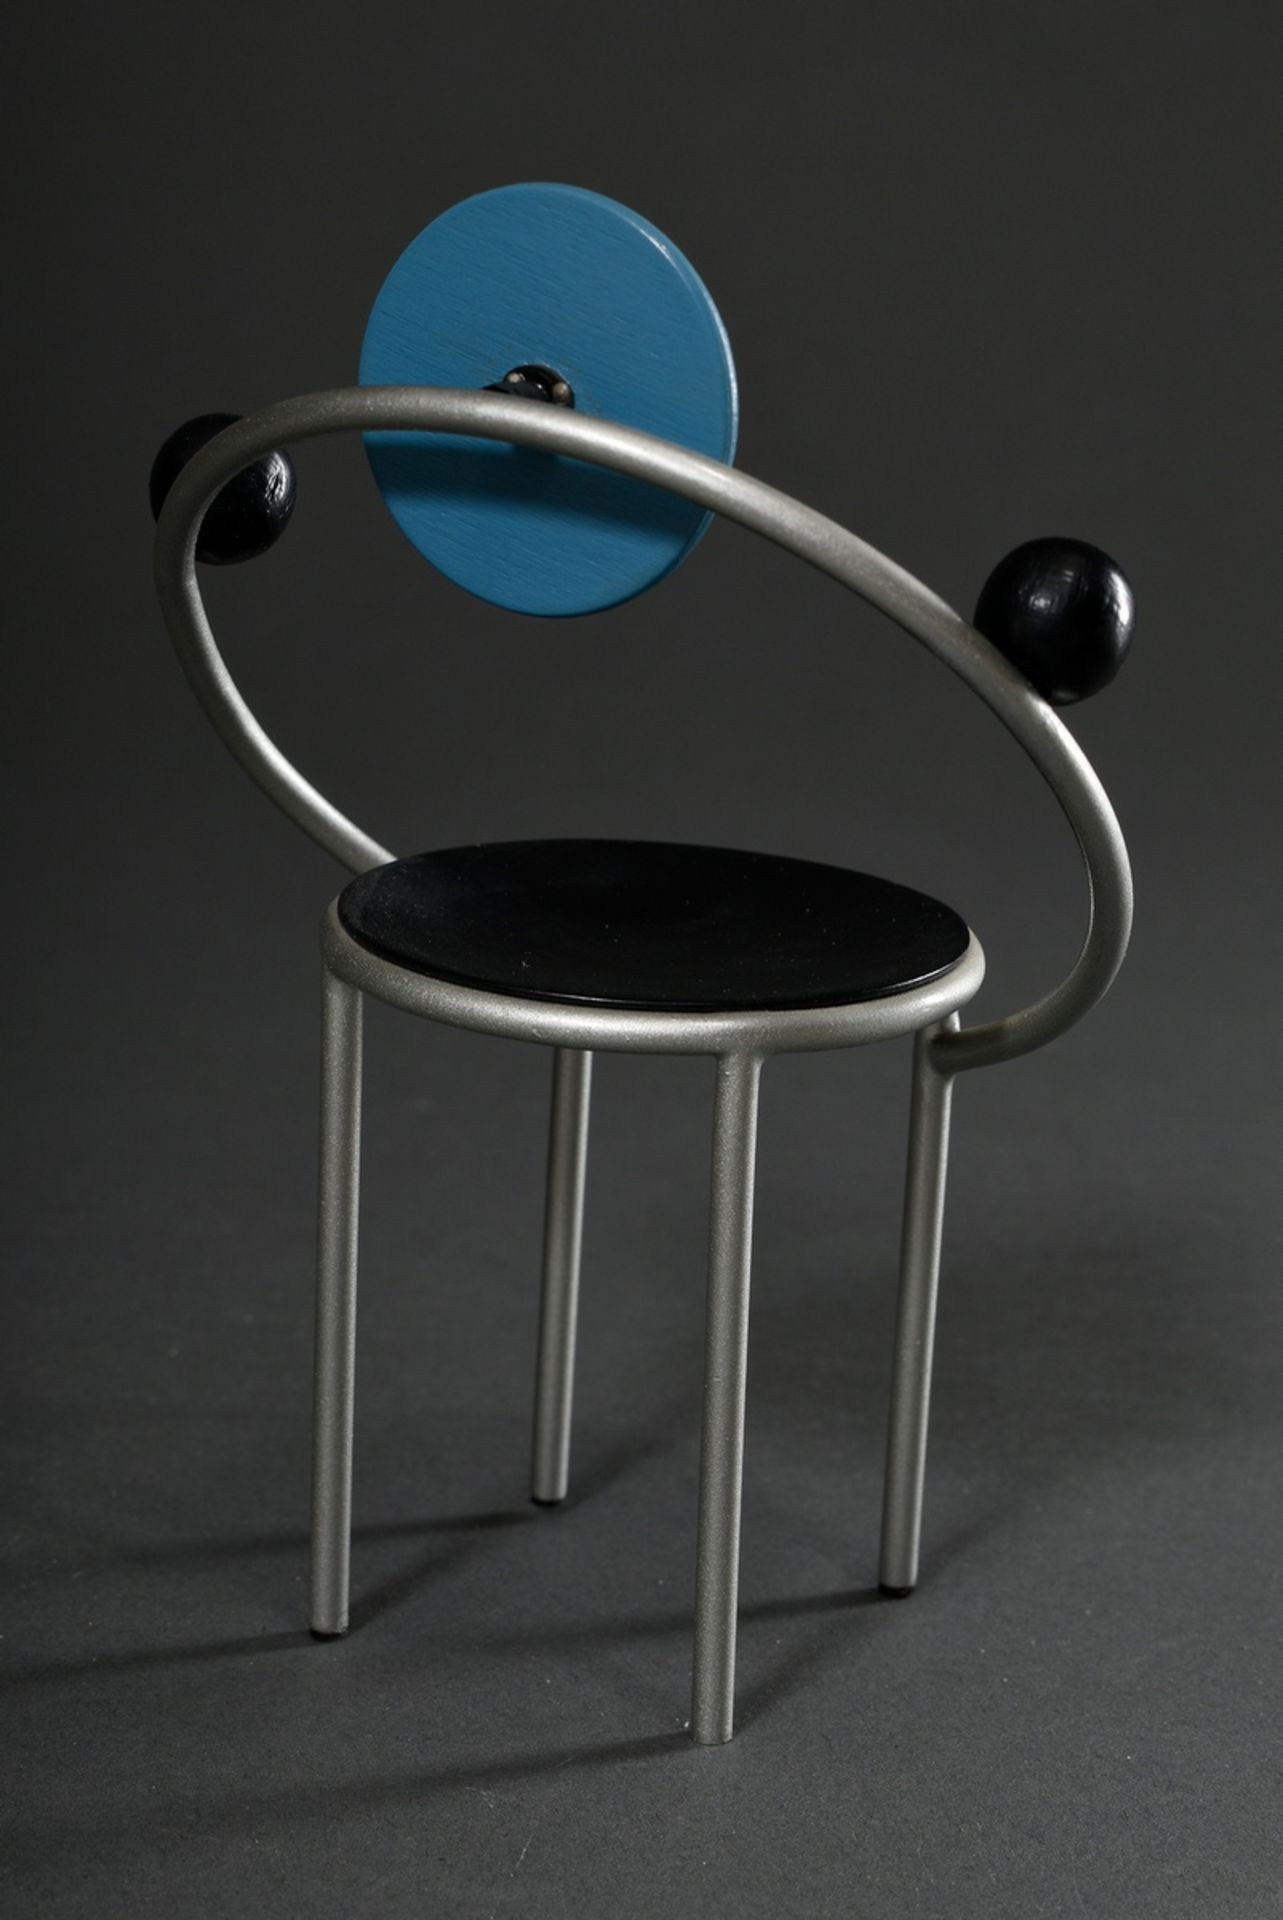 Miniature model chair "First", design: Michele De Lucchi (Memphis Milano) 1983, steel/lacquered woo - Image 3 of 3